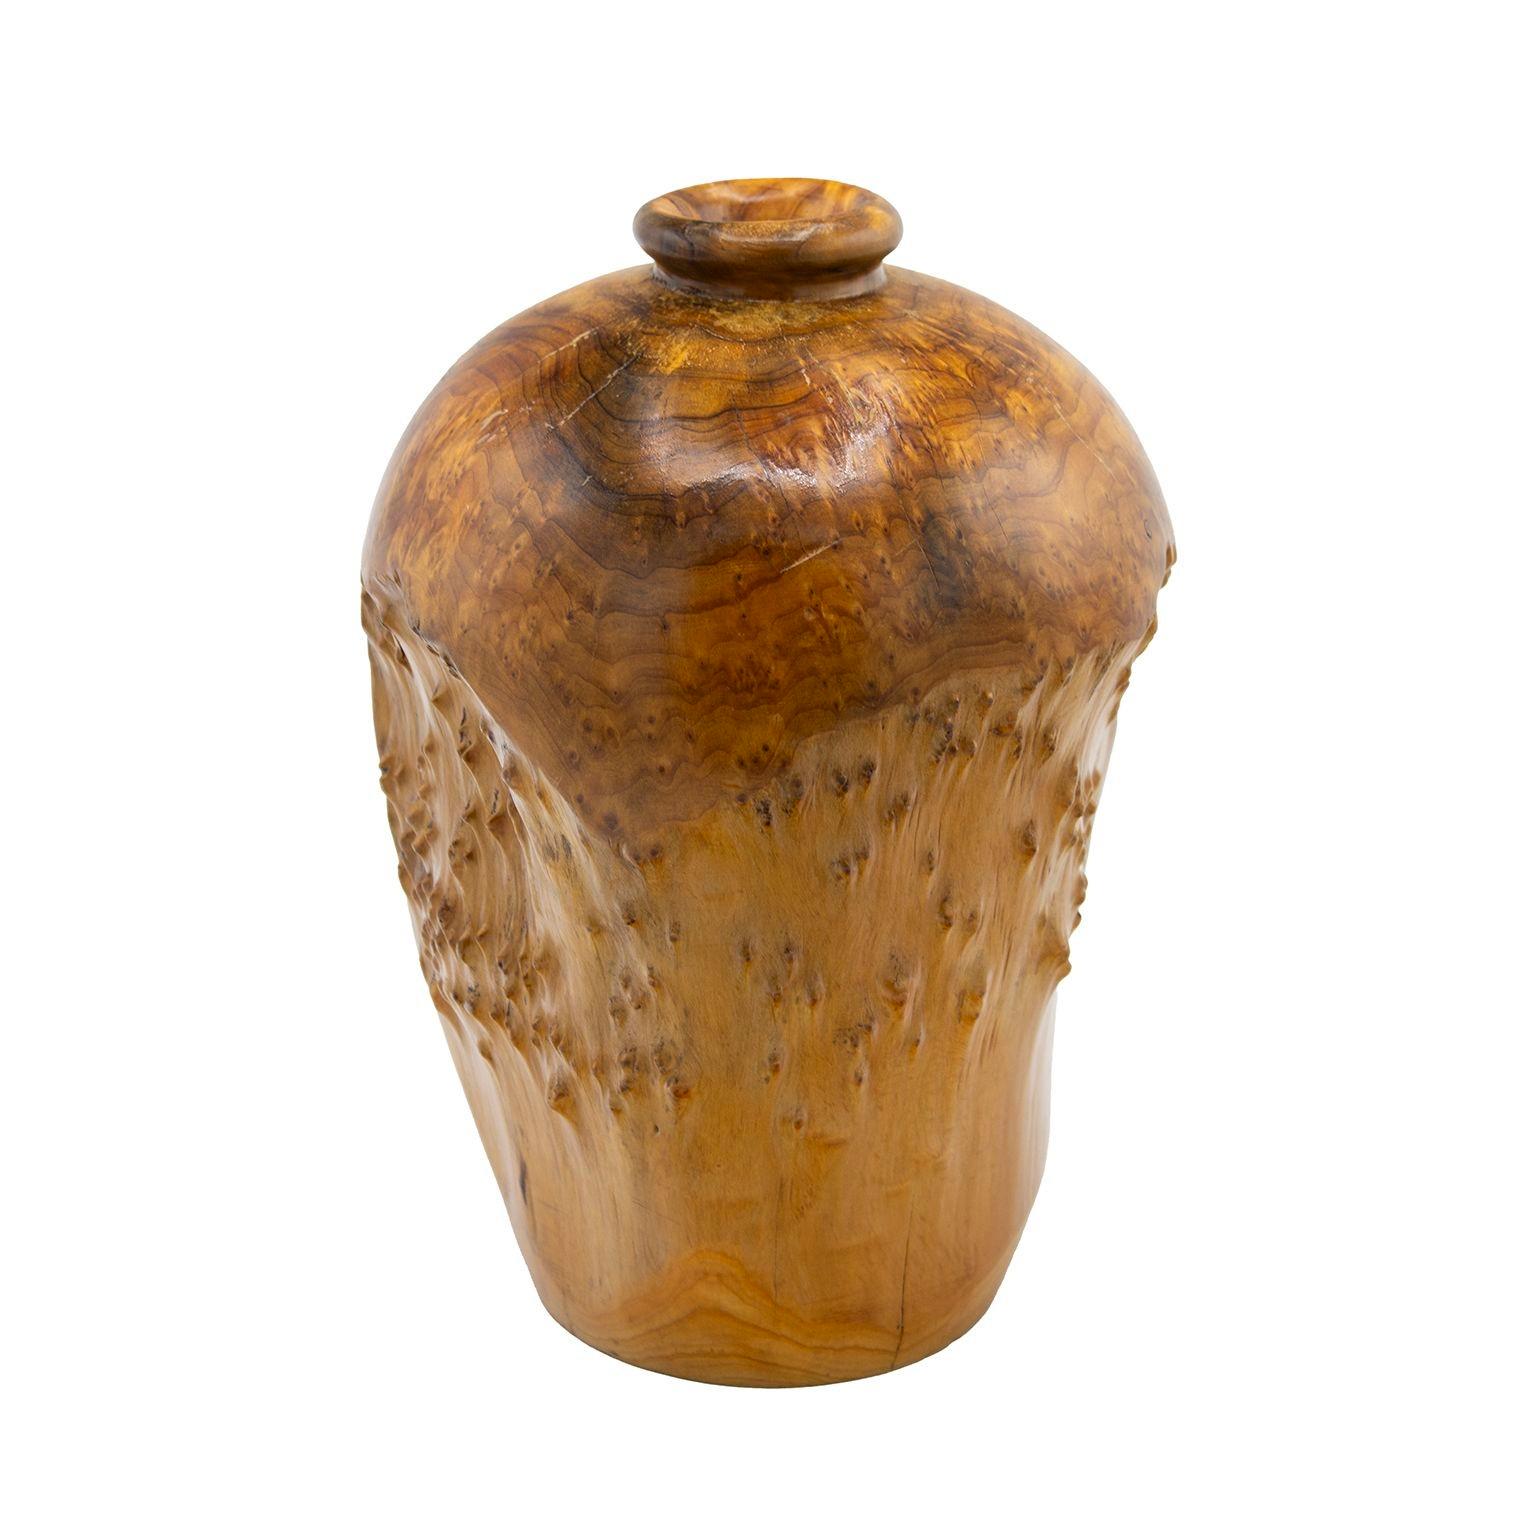 Burl Wood Vessel or Vase in Chinese Fir For Sale 4